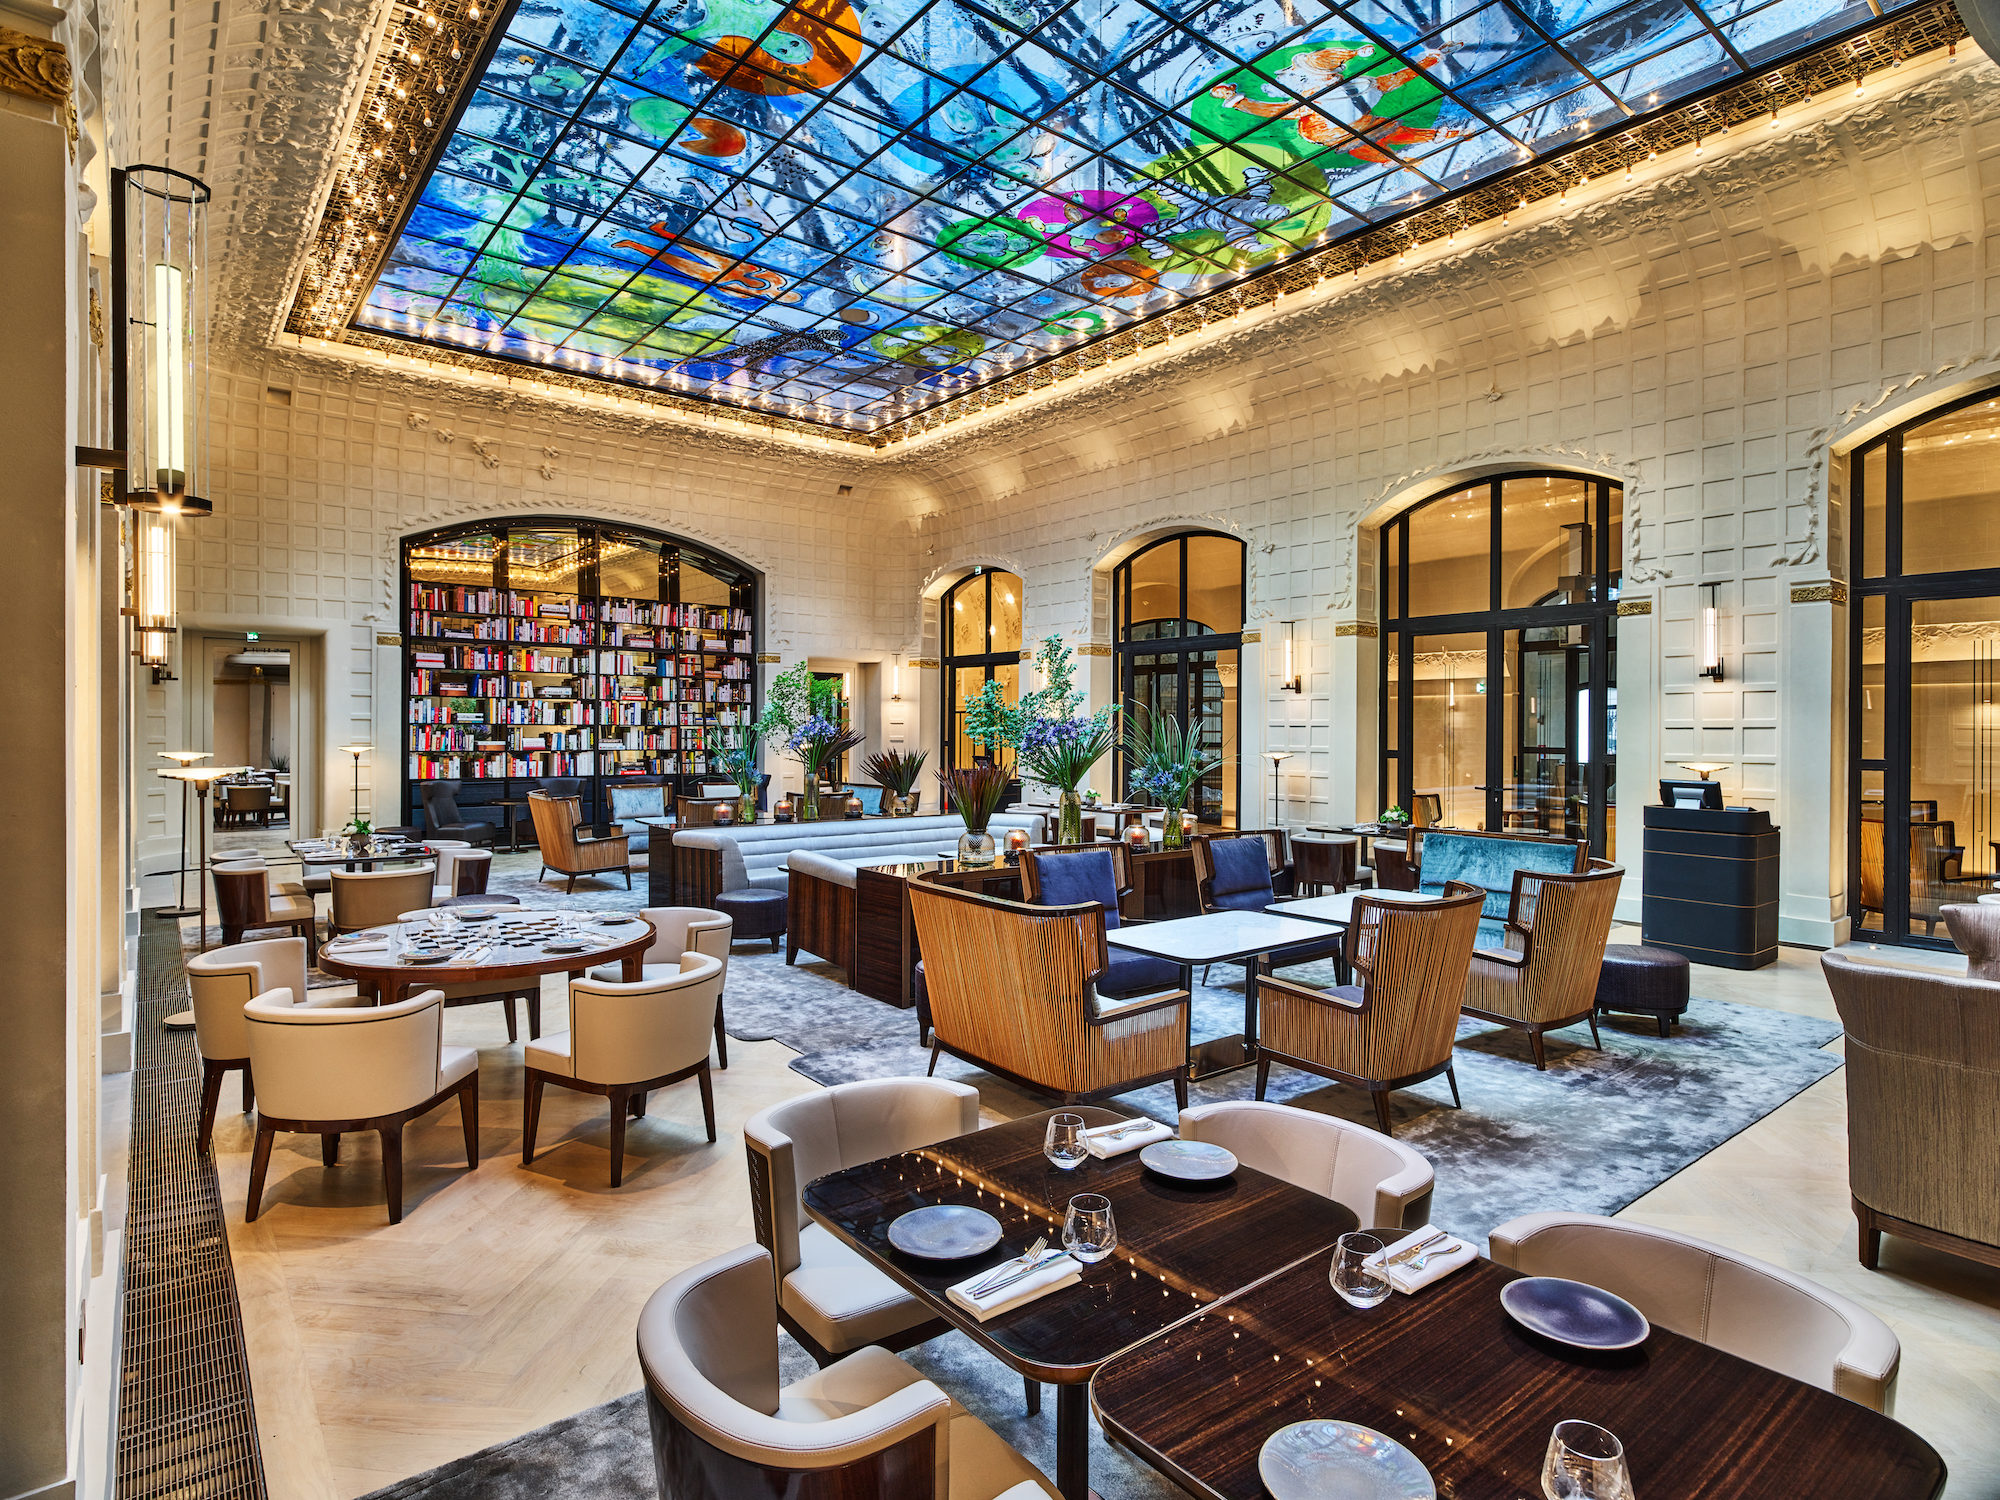 The interiors of Le Saint-Germain restaurant at Hotel Lutetia with custom woven raffia armchairs and outlandish watercolor motifs painted onto the large glass ceiling